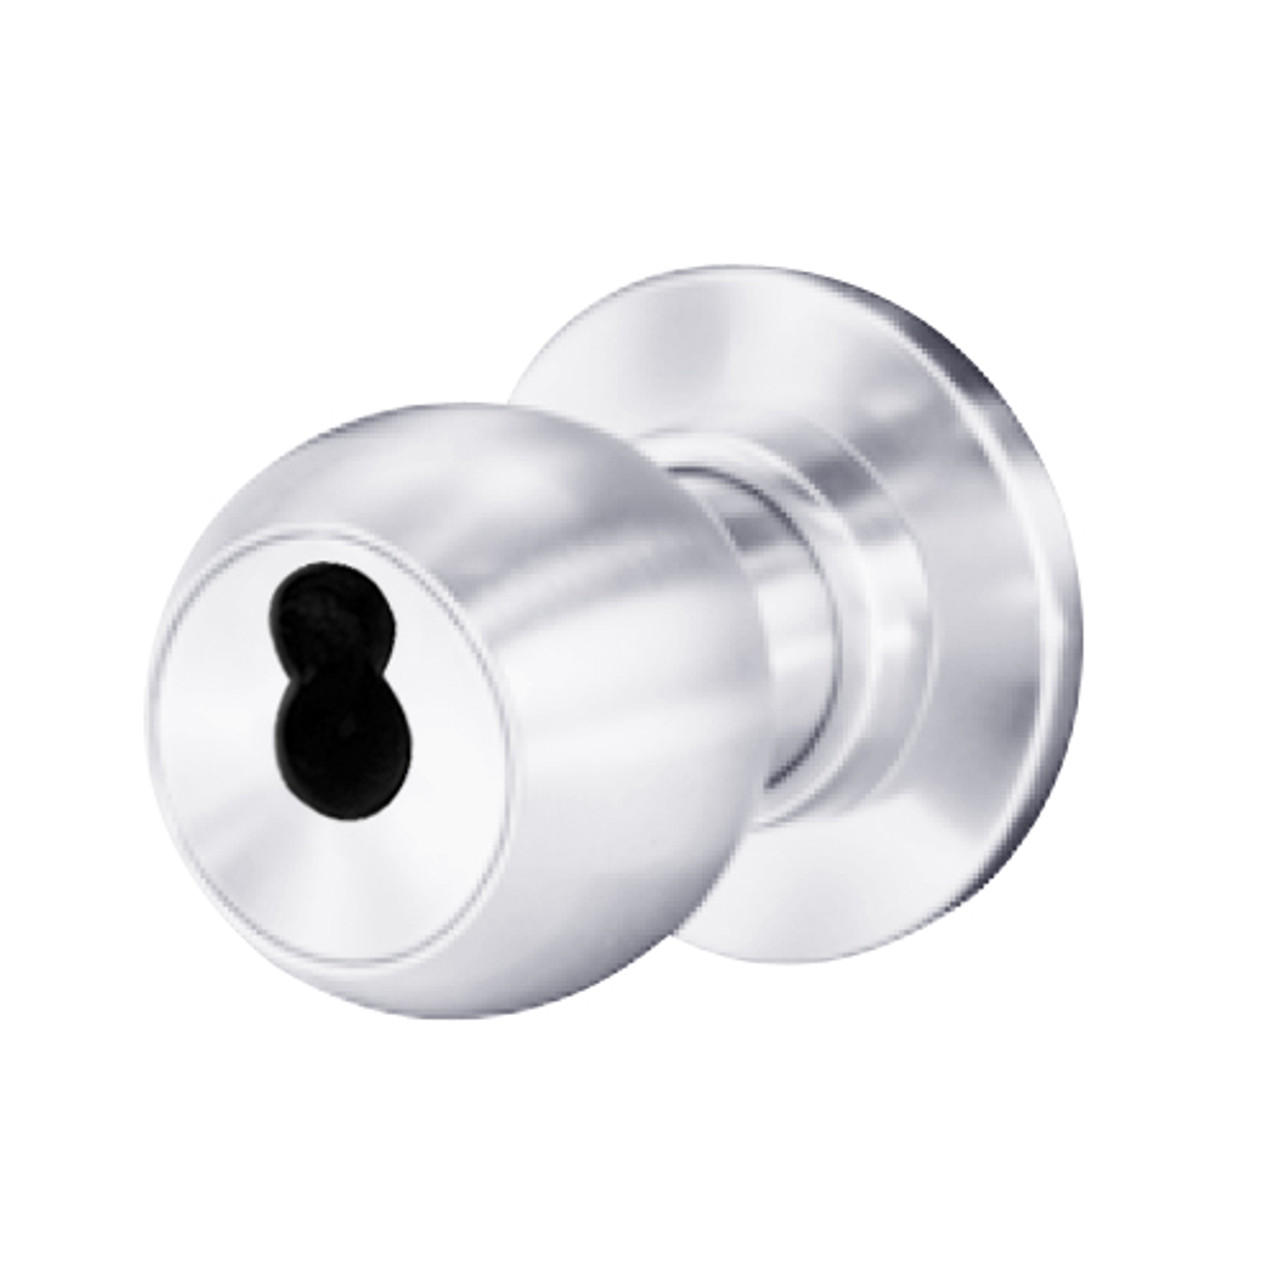 8K37S4CS3625 Best 8K Series Communicating Heavy Duty Cylindrical Knob Locks with Round Style in Bright Chrome